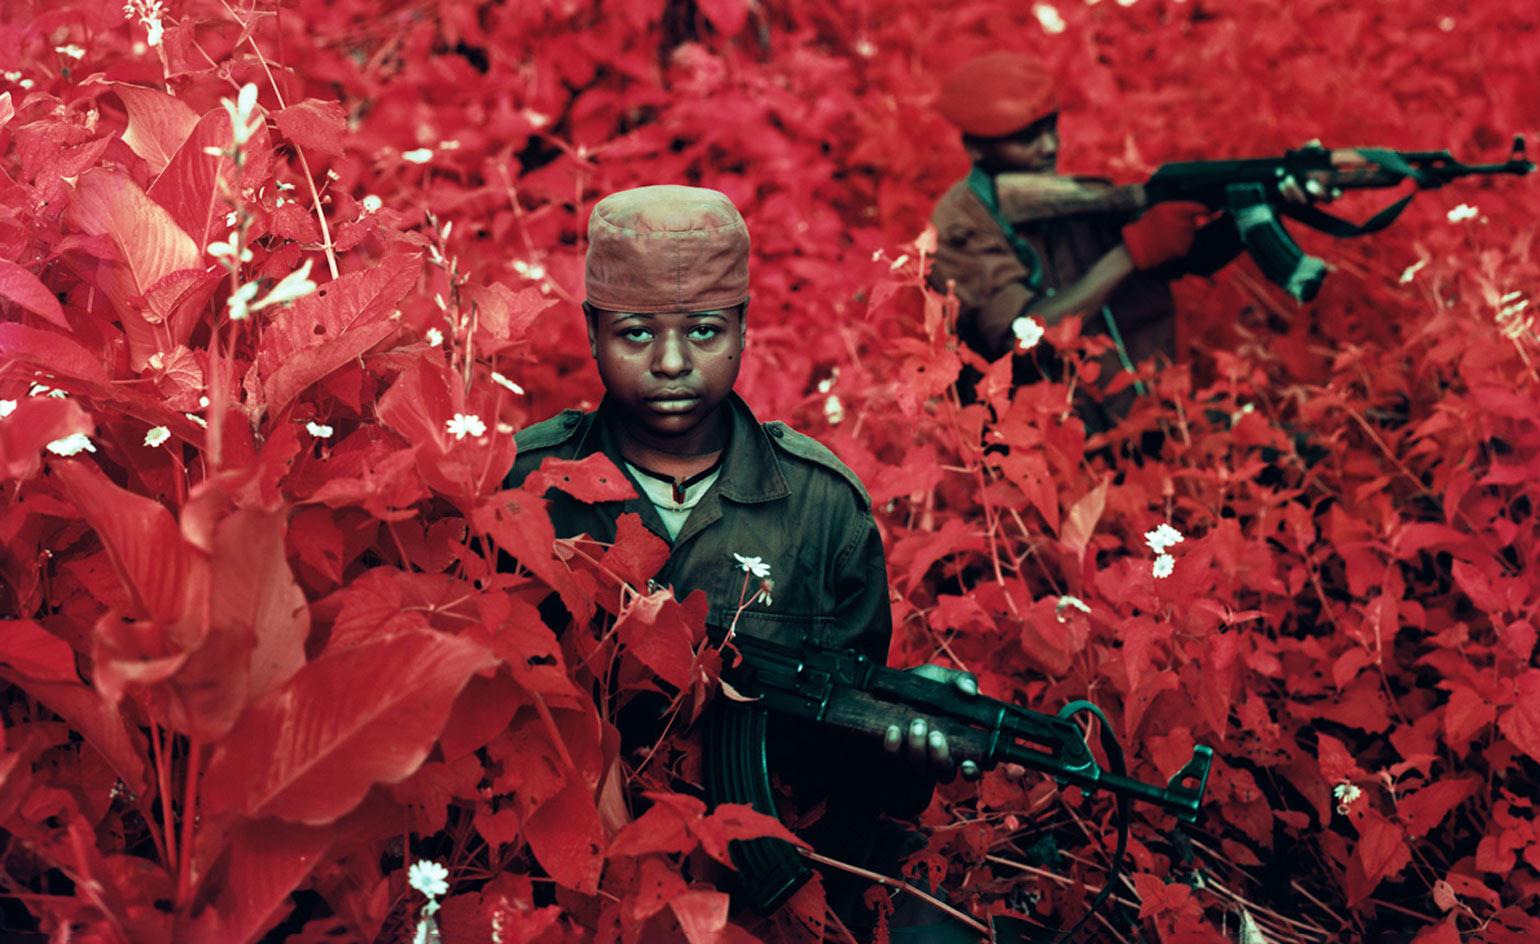 Richard Mosse: when a weapon becomes a tool for storytelling. Wallpaper*